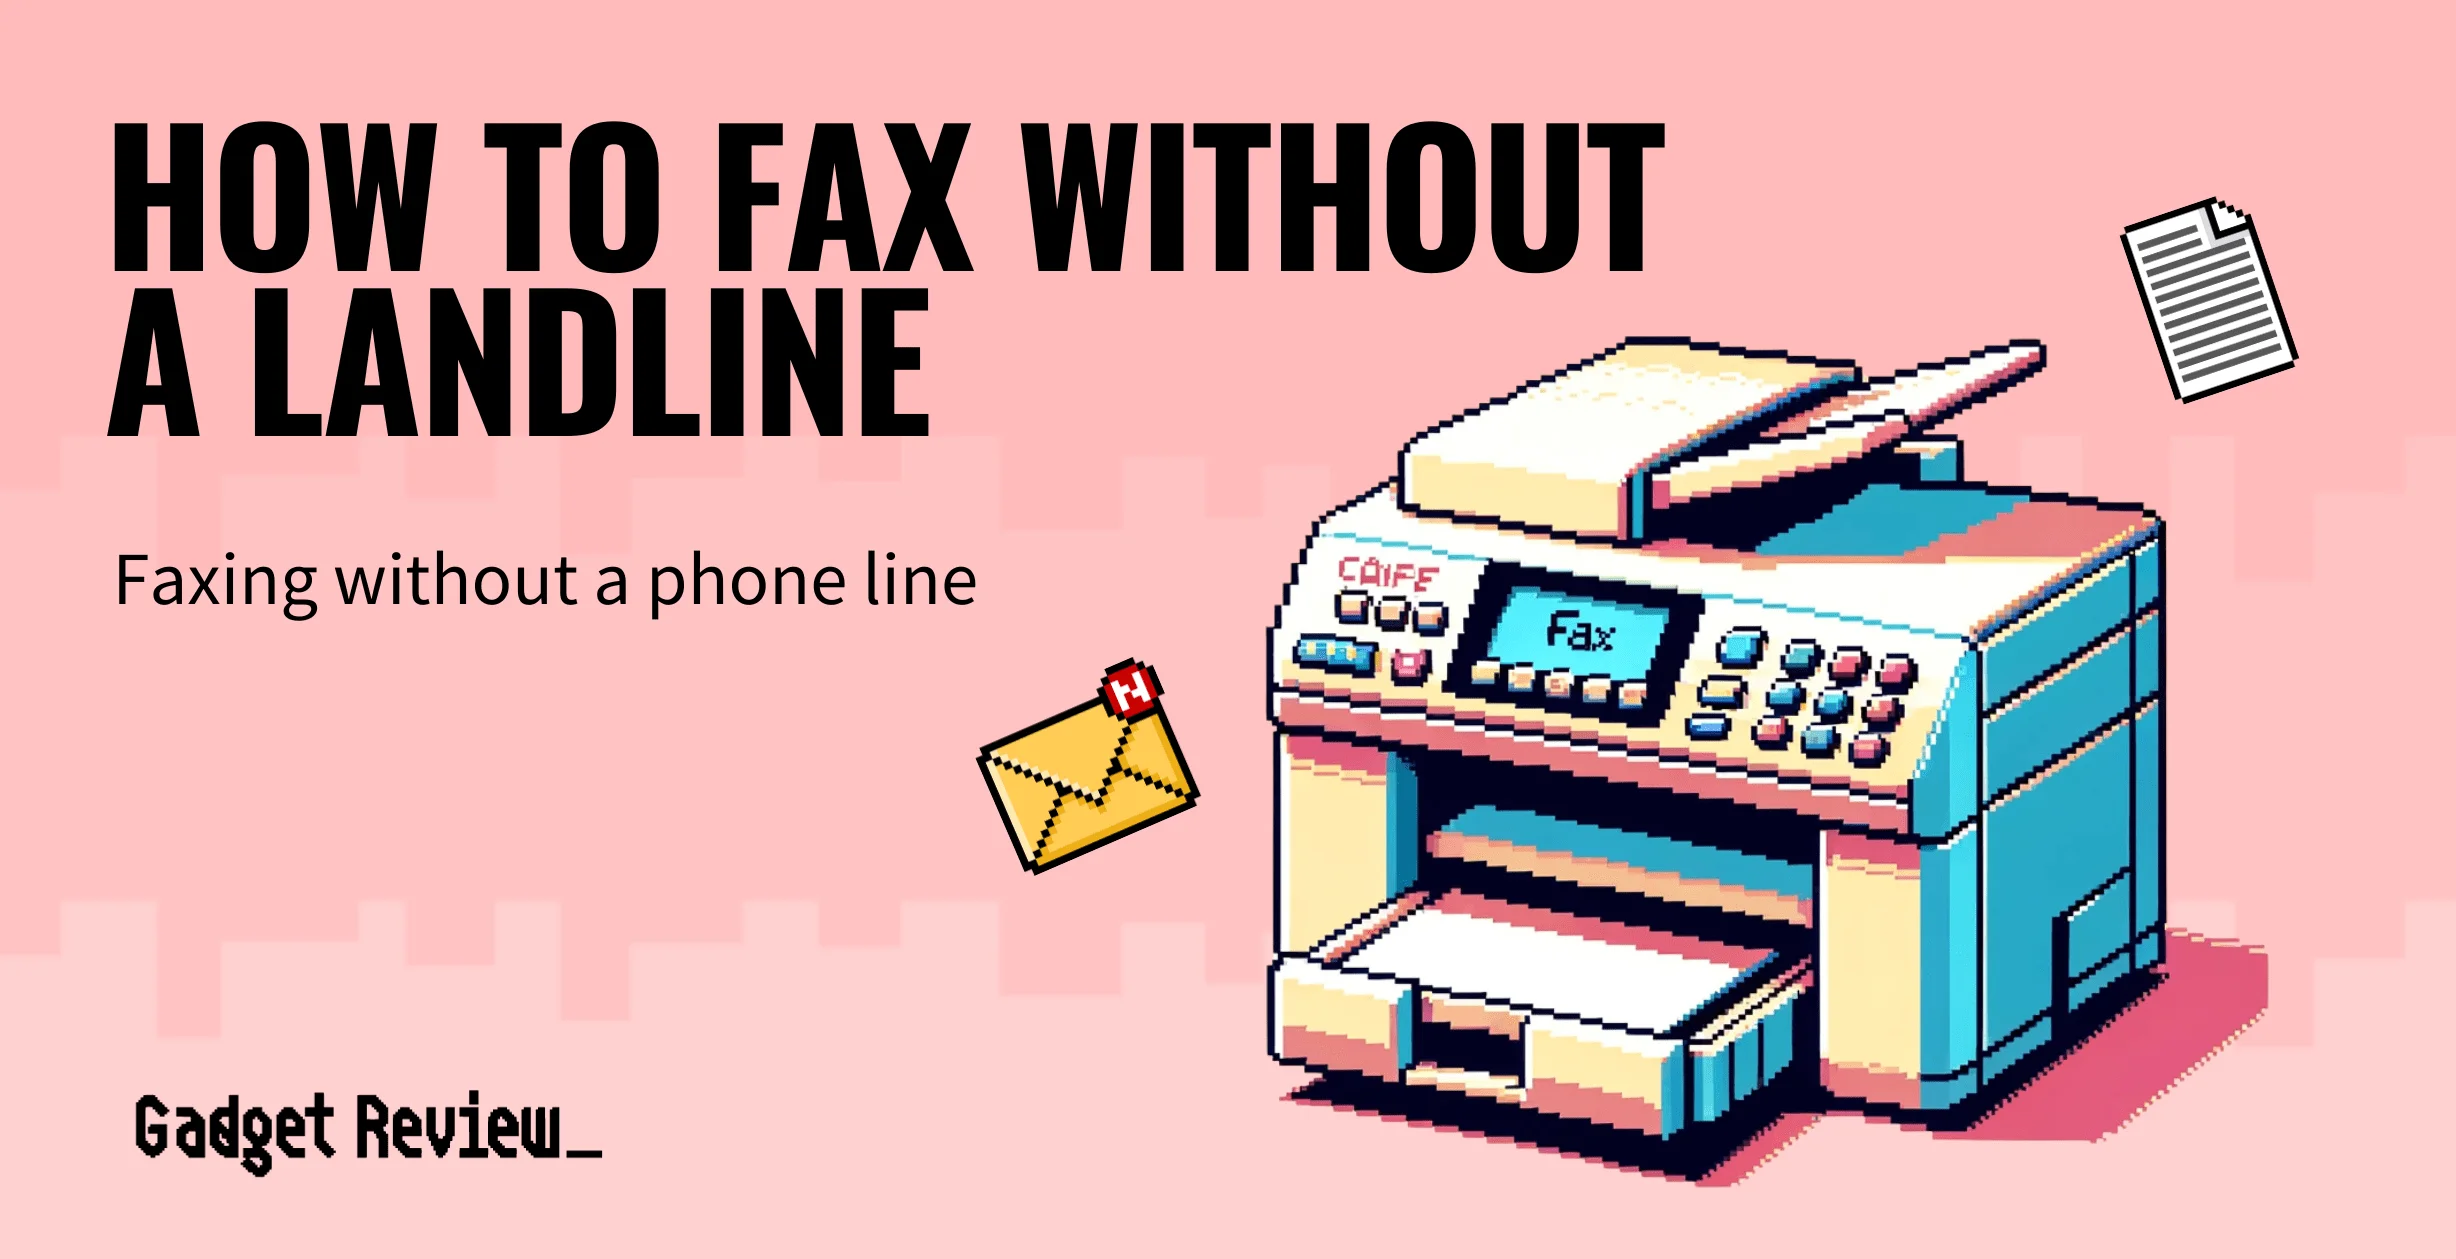 How to Fax Without a Landline